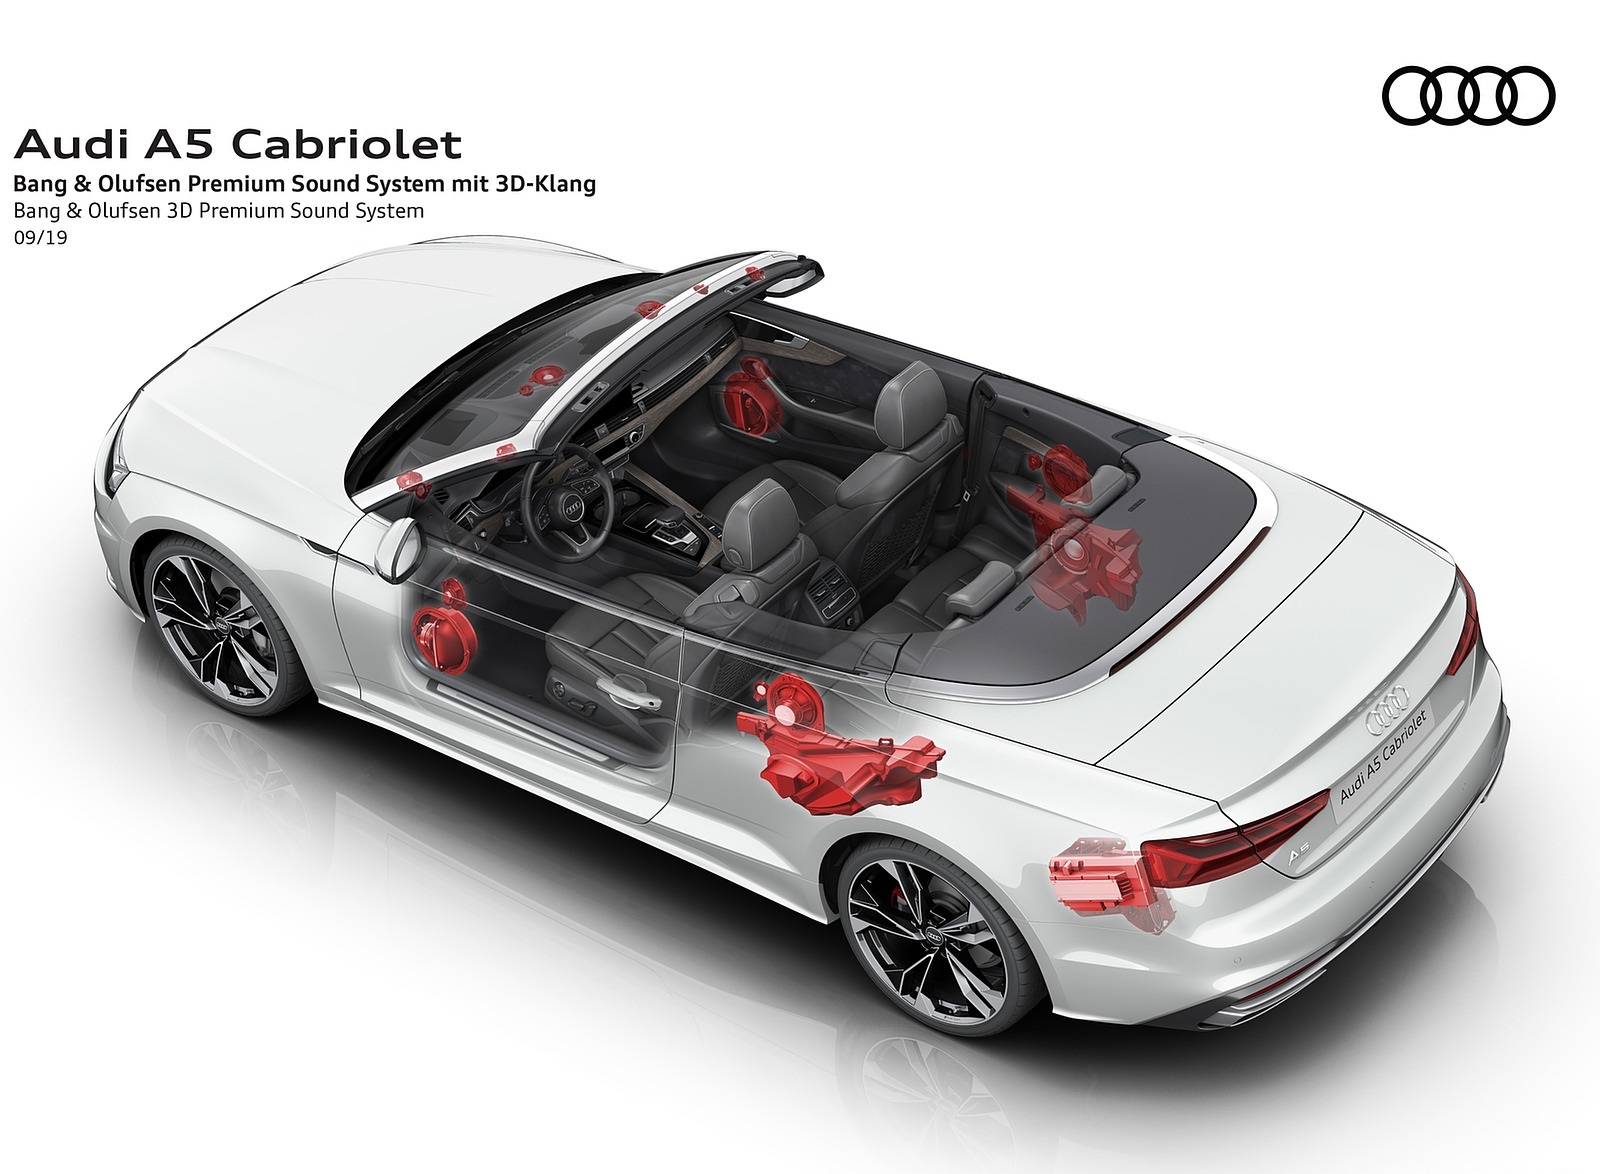 2020 Audi A5 Cabriolet Bang and Olufsen 3D Premium Sound System Wallpapers #20 of 29